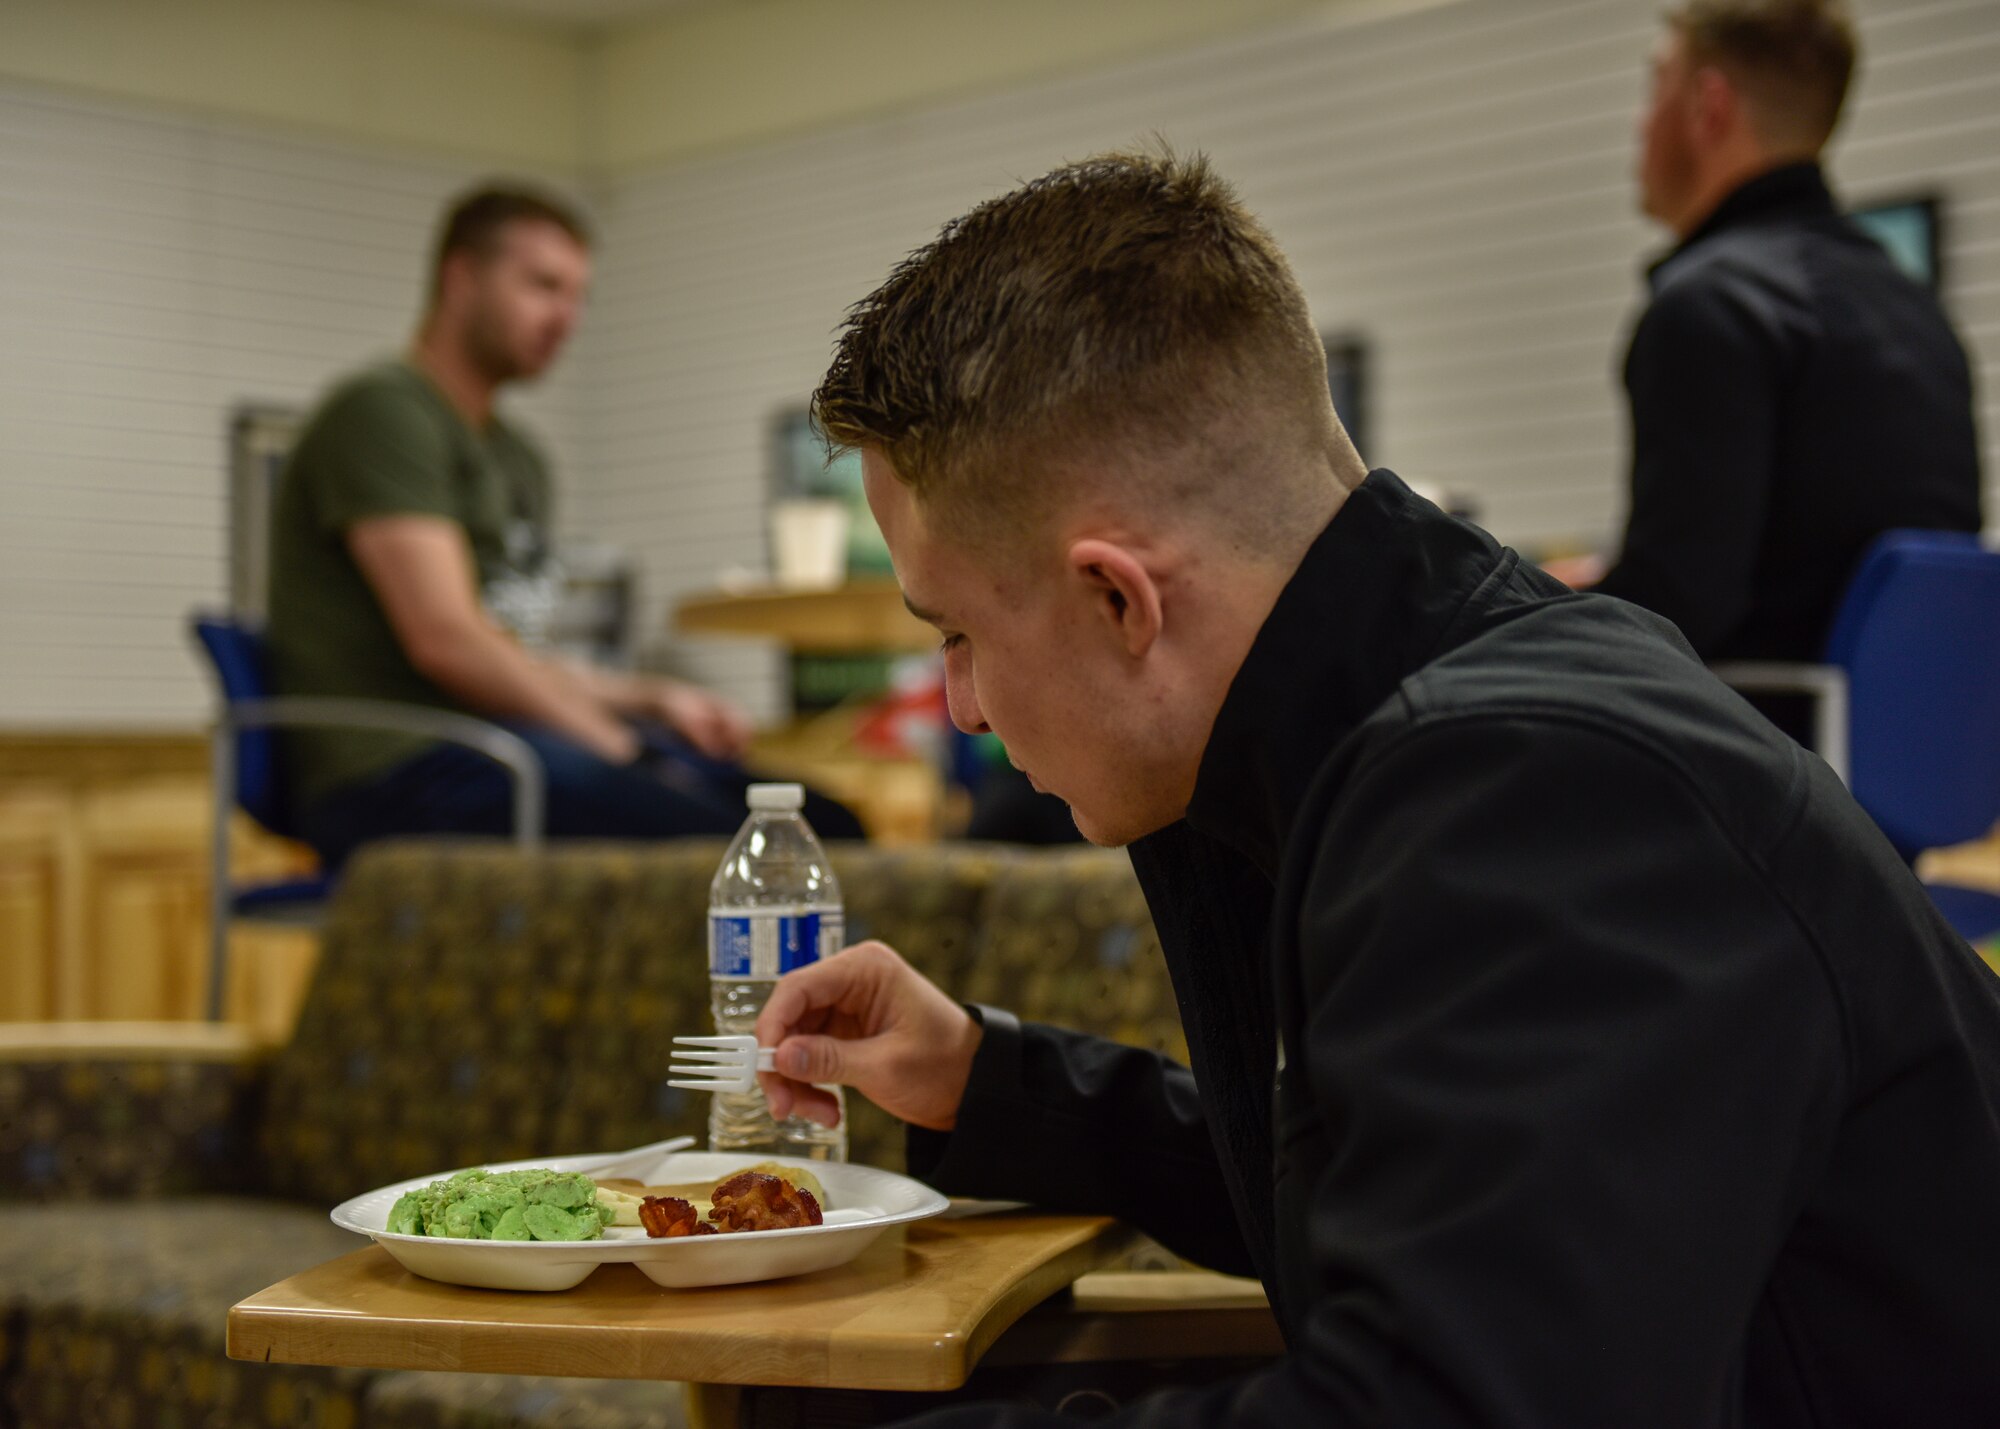 U.S. Air Force Airman 1st Class Cody Mullen, 58th Special Operations Wing Client Systems technician, takes part in the first “4 Airmen for Airmen” event at Kirtland Air Force Base, N.M., March 17, 2019. Breakfast was provided by “4 Airmen for Airmen,” a grass-roots effort by Airmen who are committed to making a positive difference by building community, connections and support they hope to hold more events like the breakfast in the future. (U.S. Air Force photo by Airman 1st Class Ausitn J. Prisbrey)